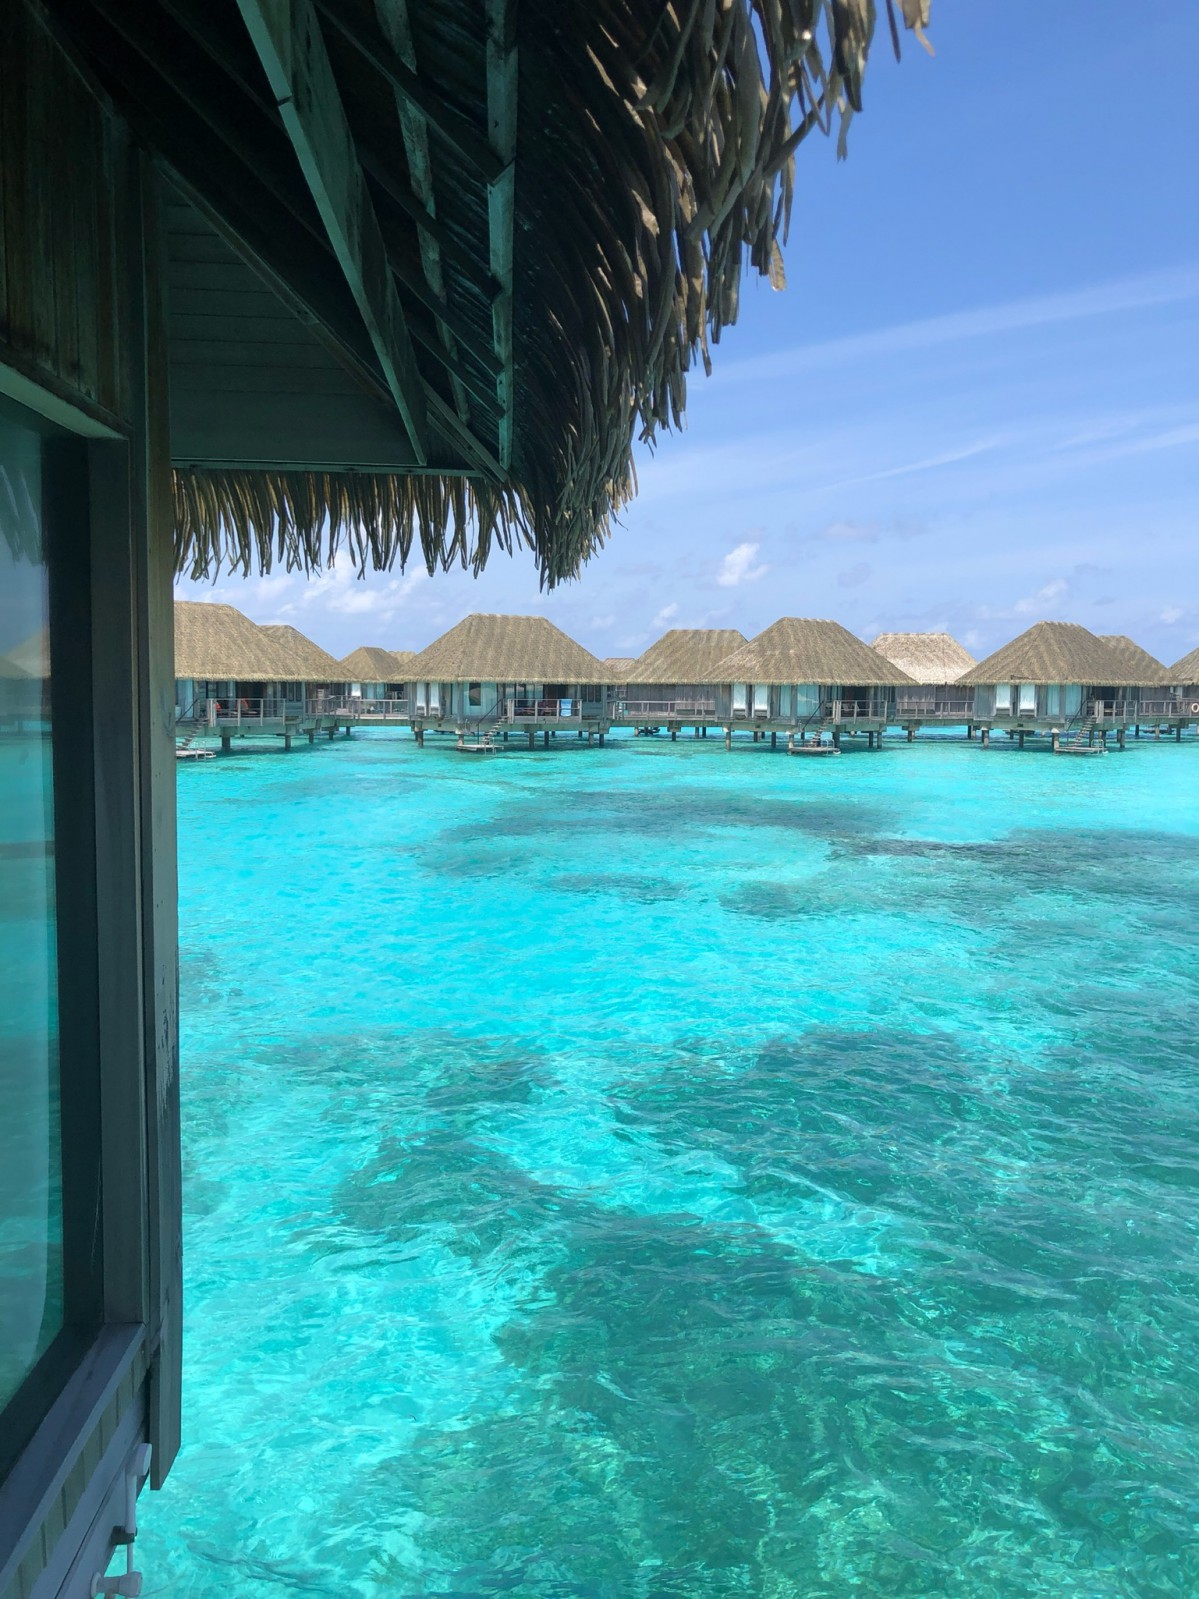 Club Med Kani — luxury party island in The Maldives